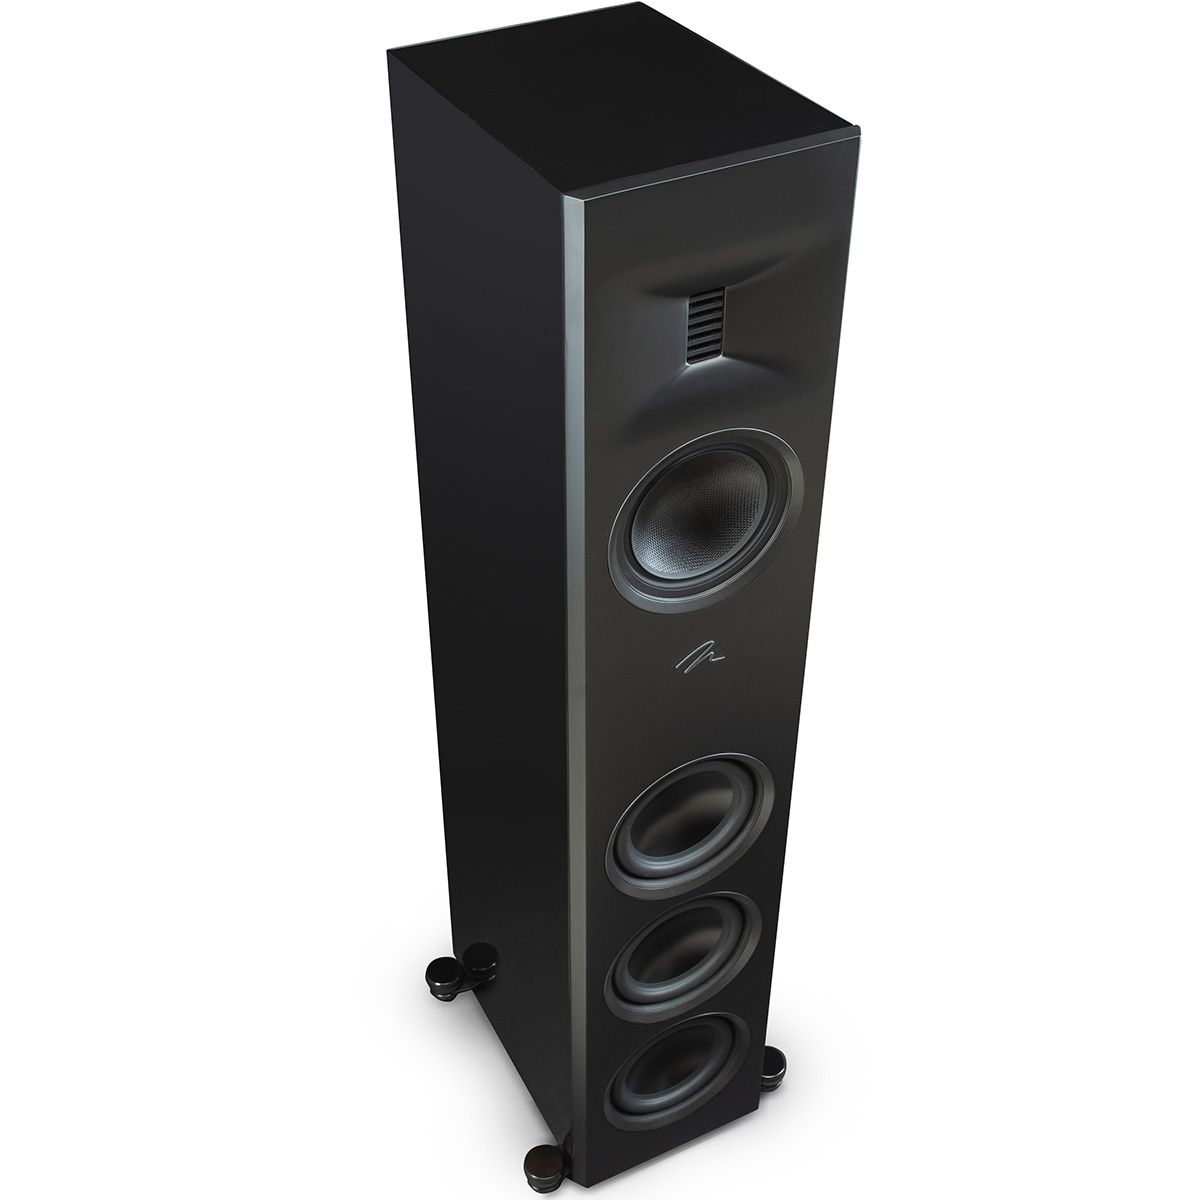 MartinLogan Motion XT F100  Floorstanding Speaker in black, skyscraper view with grilles off white background